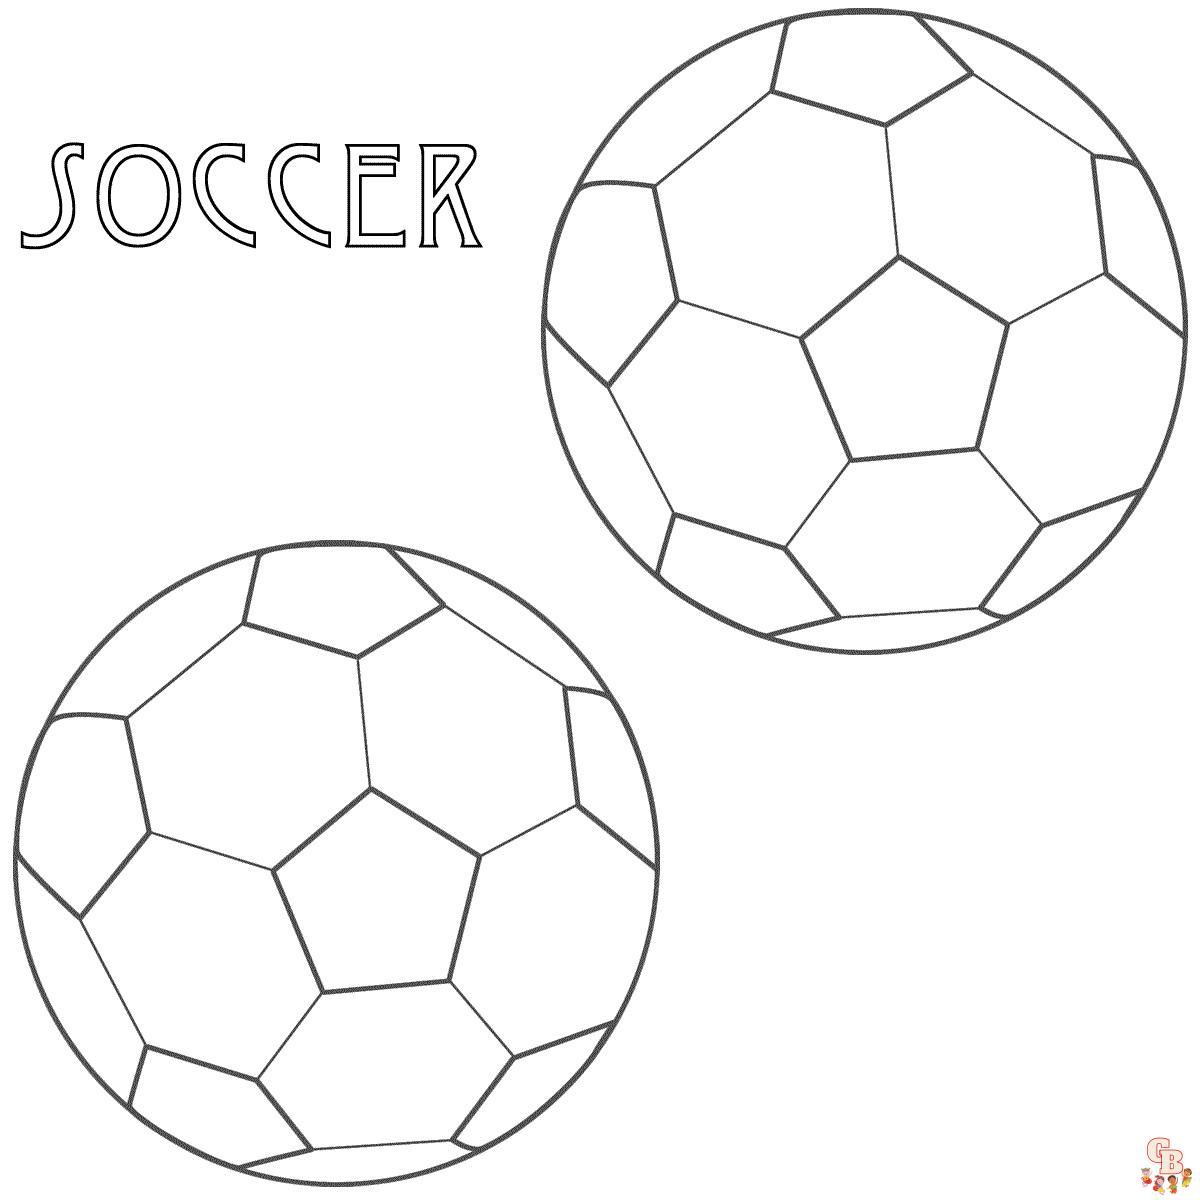 Soccer coloring pages